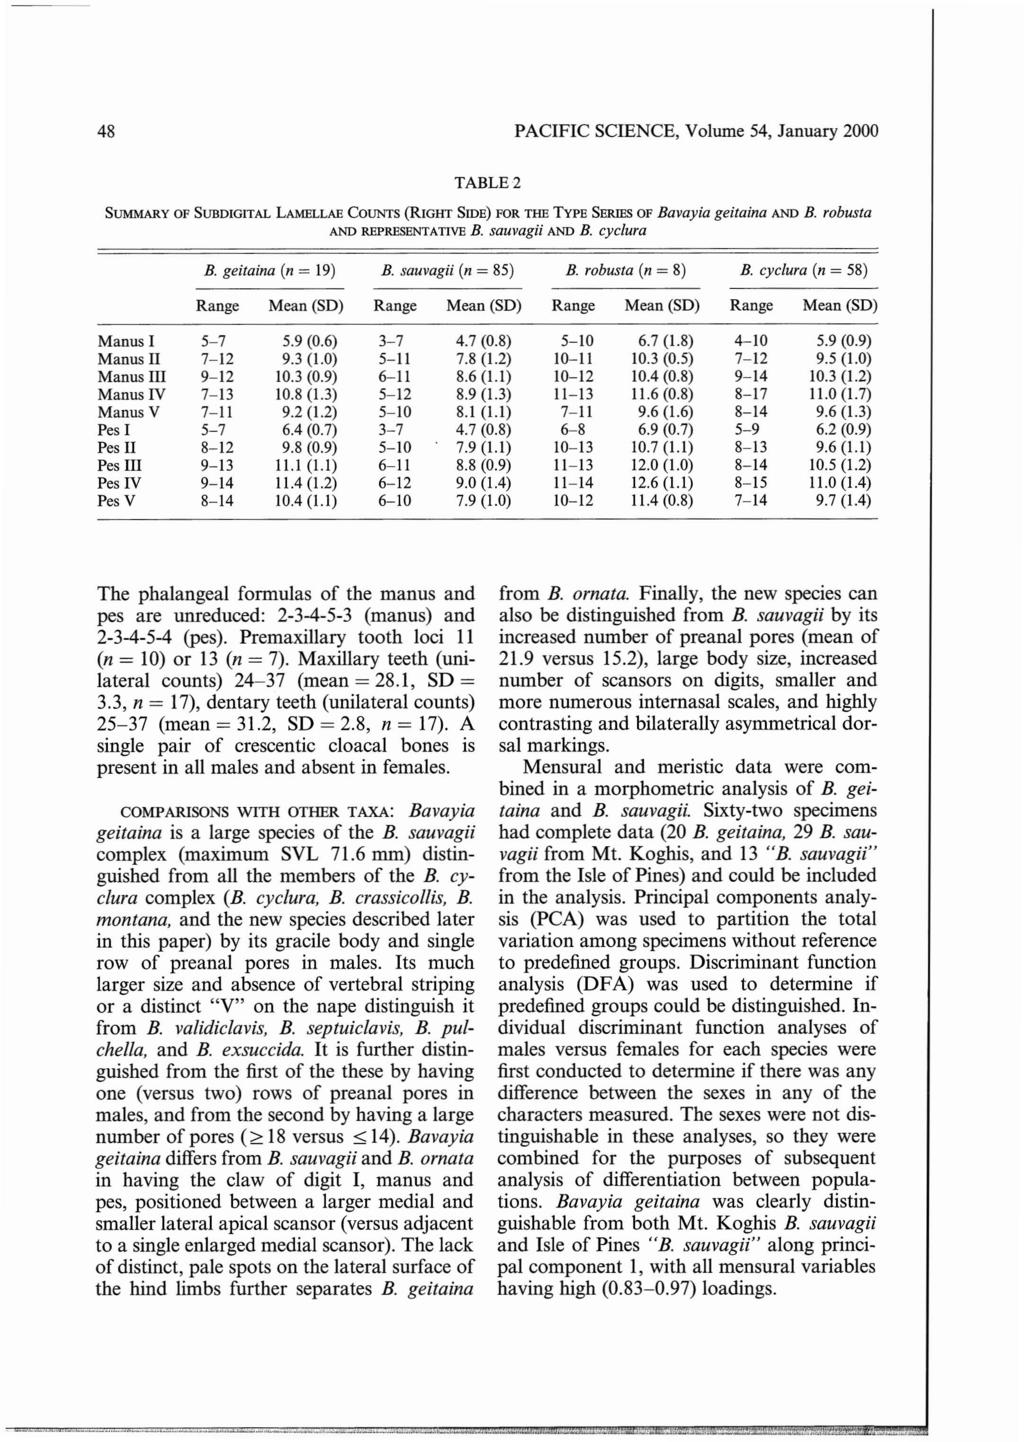 48 PACIFIC SCIENCE, Volume 54, January 2000 TABLE 2 SUMMARY OF SUBDIGITAL LAMELLAE COUNTS (RIGHT SIDE) FOR THE TYPE SERIES OF Bavayia geitaina AND B. robusta AND REPRESENTATIVE B. sauvagii AND B.